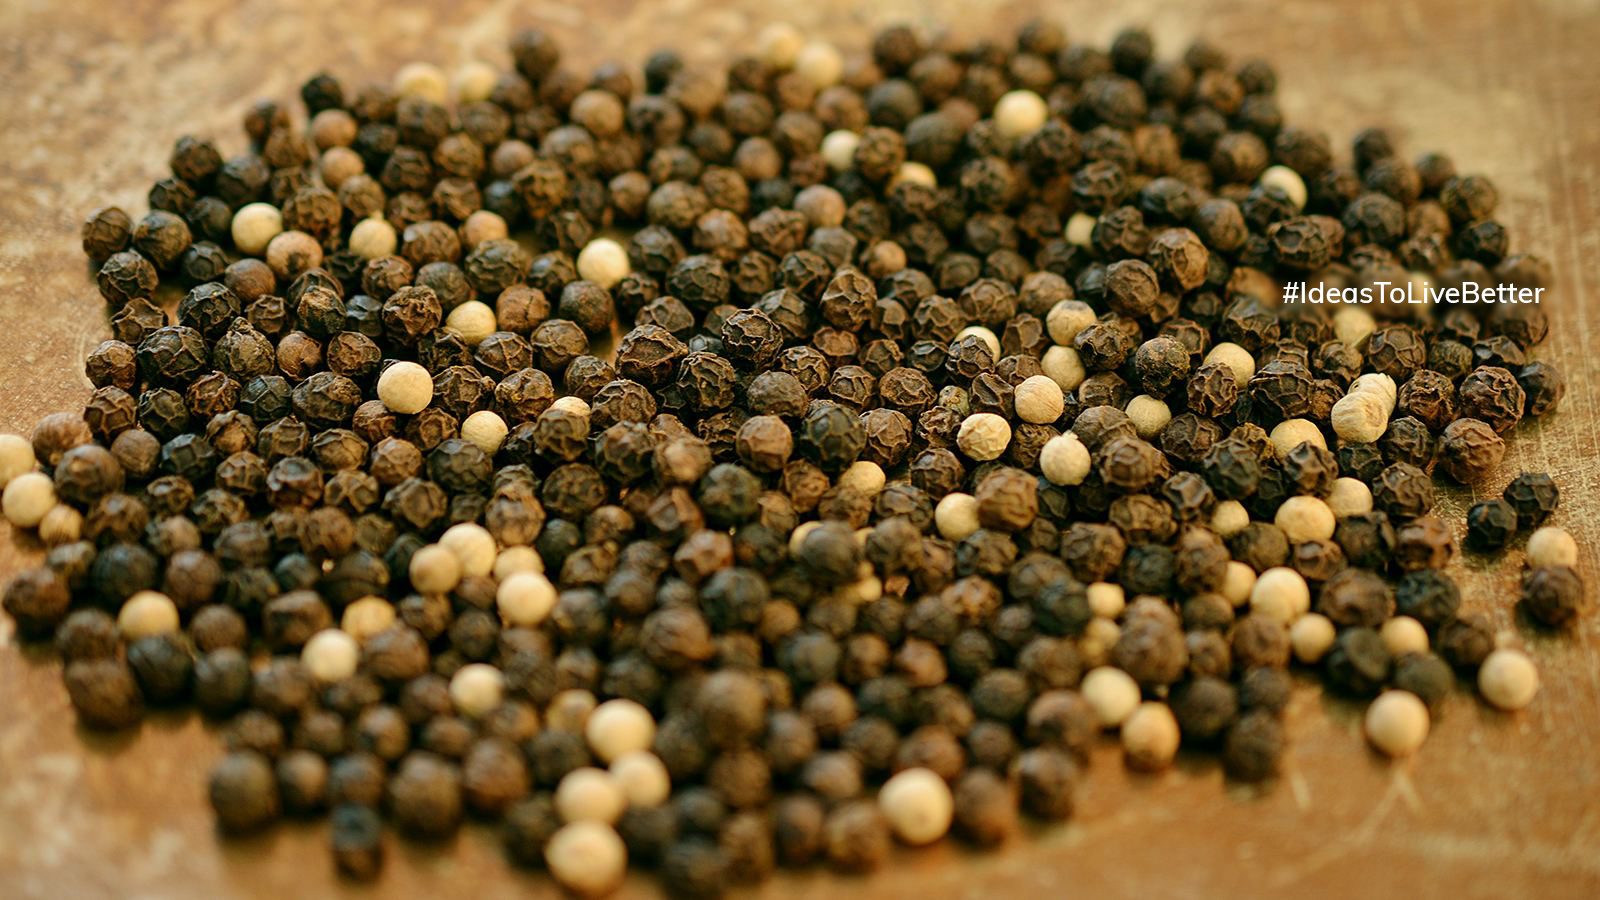 Black Pepper: The King of Spices